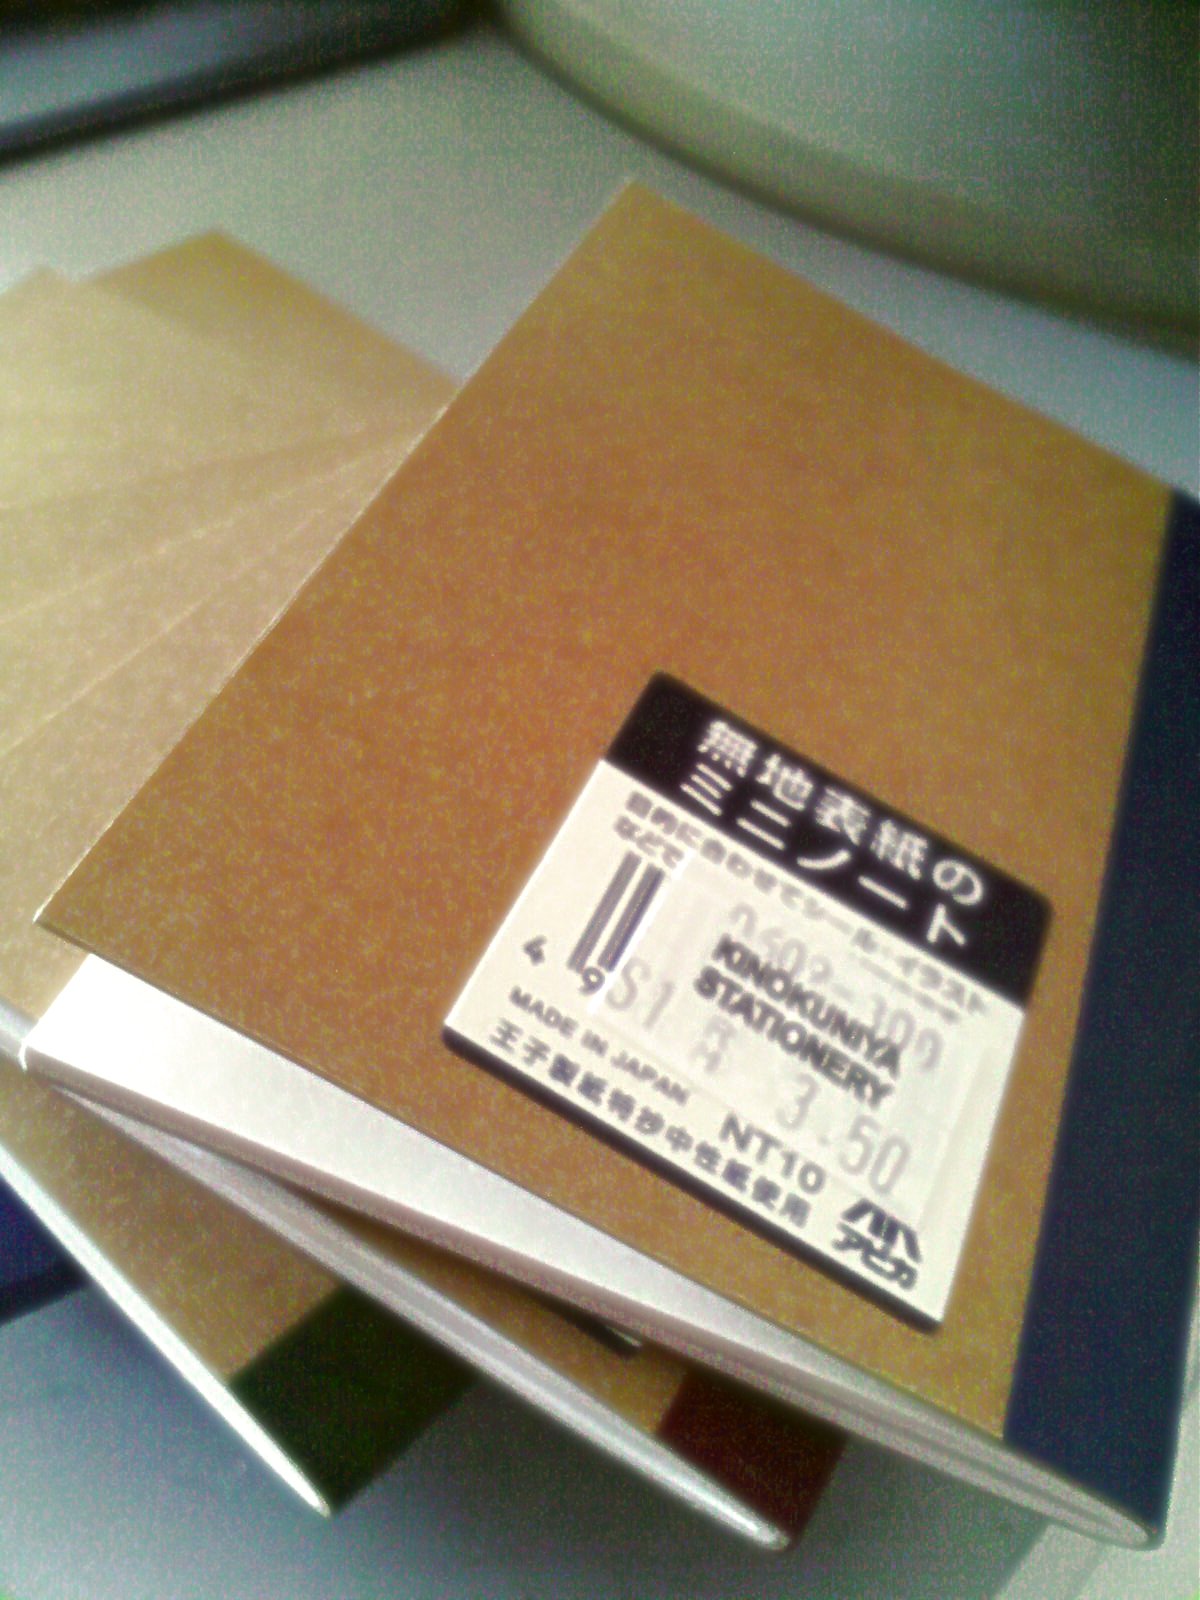 'My ideal thin, wallet-sized notebook by Apika' by Seh Hui